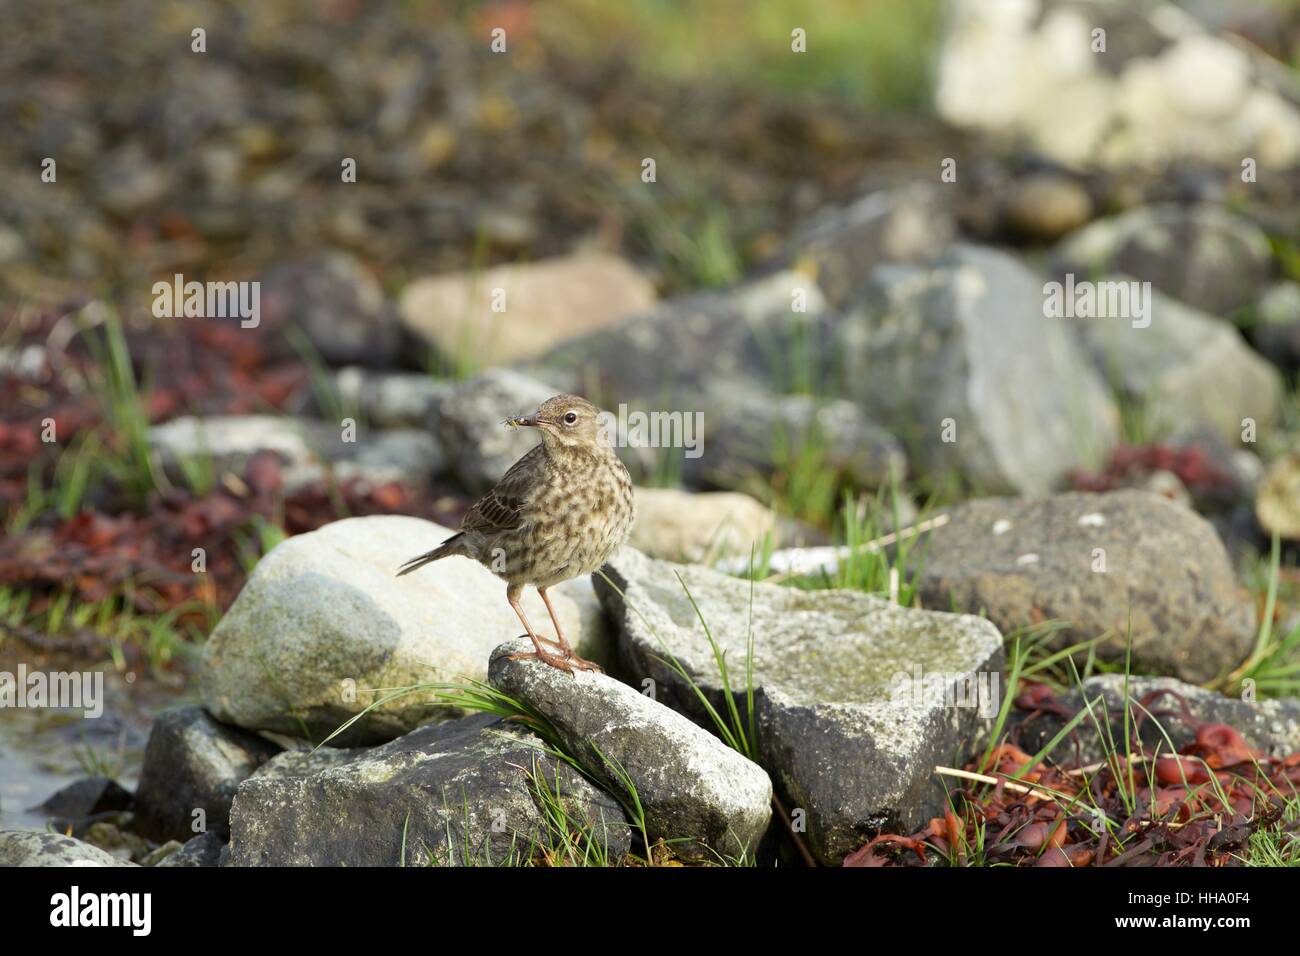 Rock pipit carrying insects, standing on a rock Stock Photo